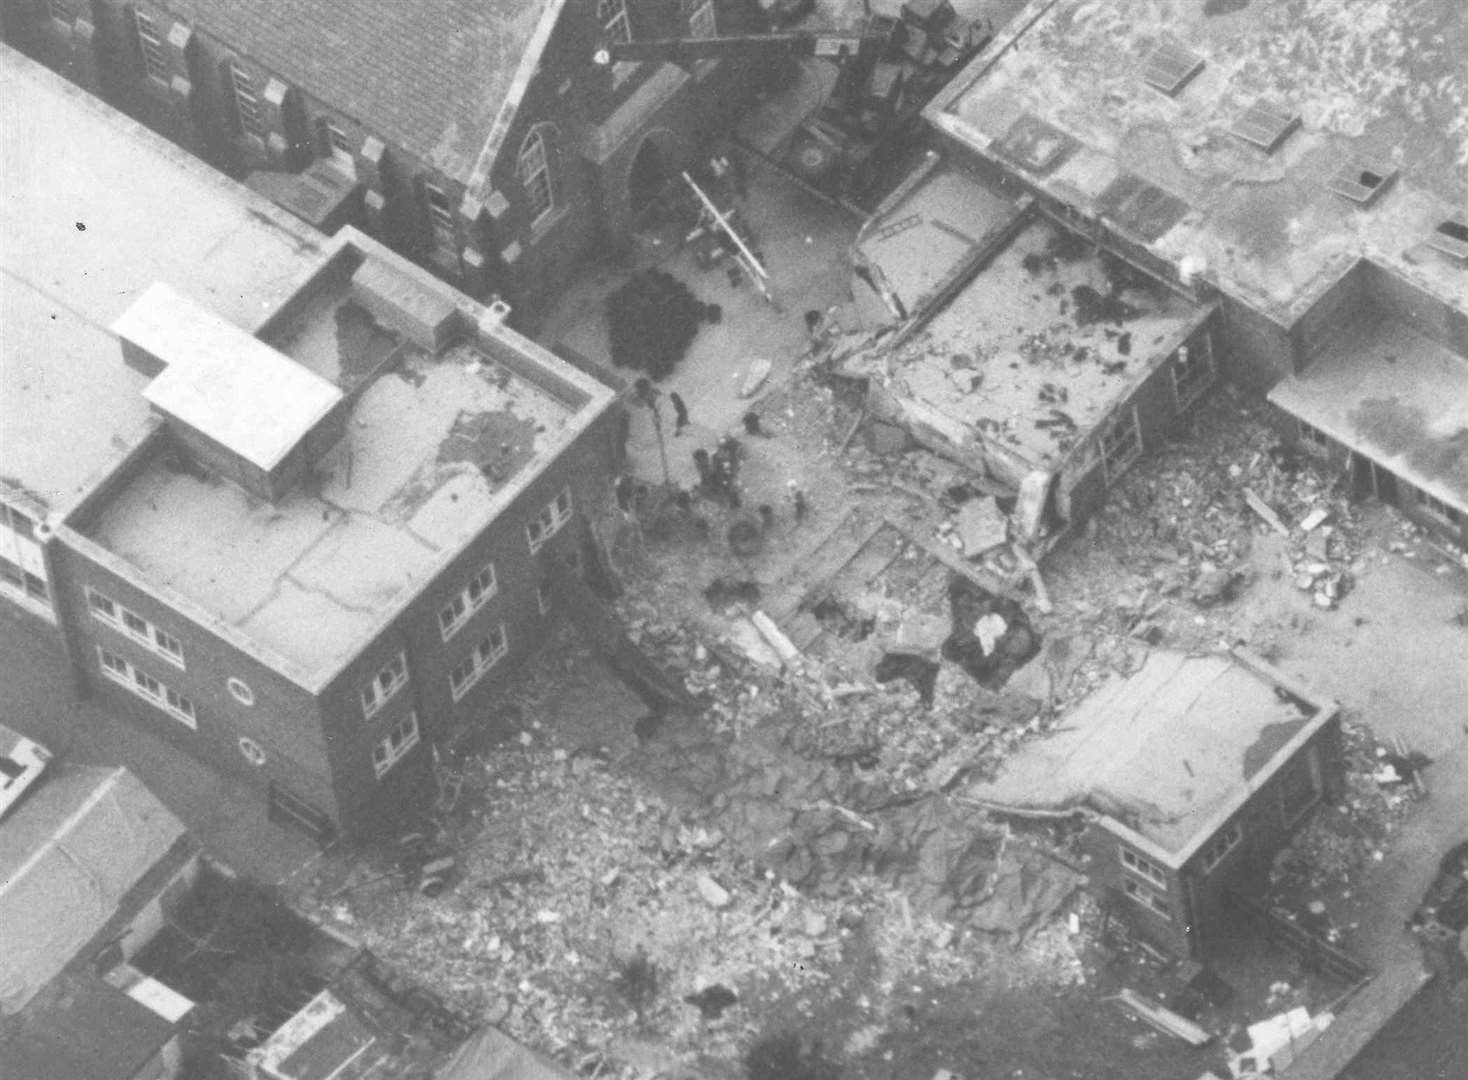 The Royal Marines Music School building in Deal destroyed by the bomb blast in 1989. No culprits have ever been caught or arrested